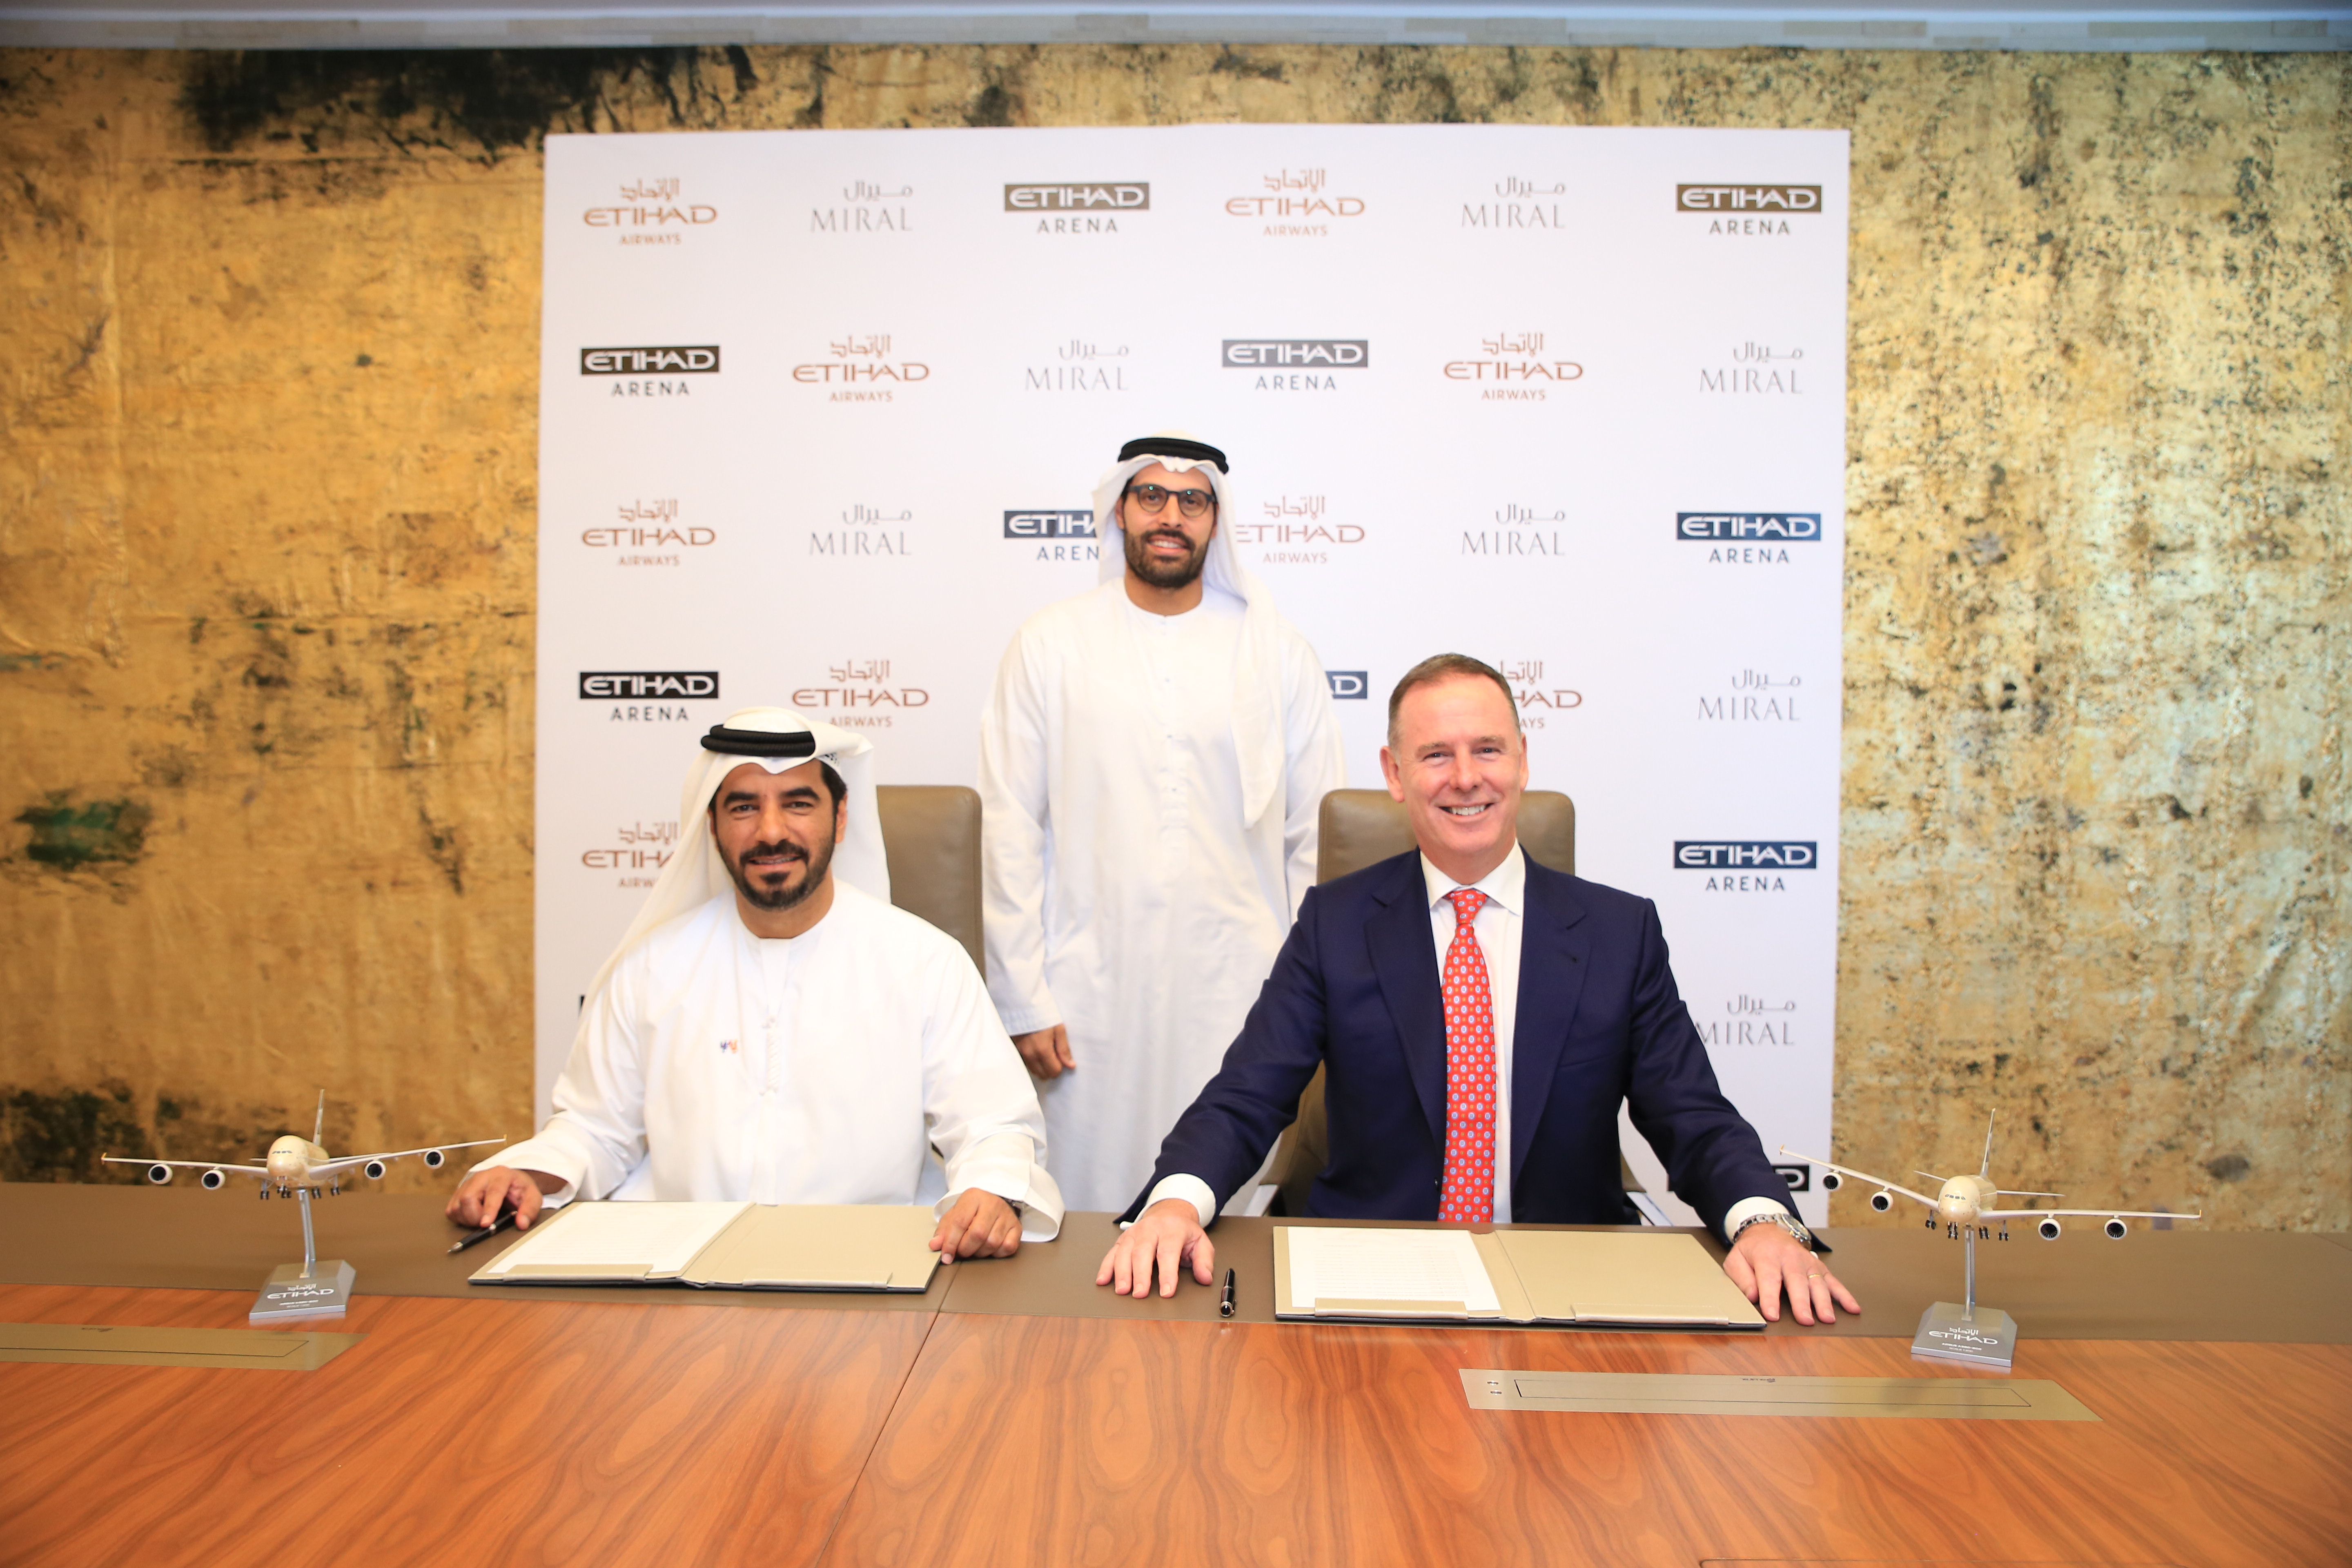 Etihad And Miral Sign Agreement Naming Etihad Arena, The New Entertainment Venue On Yas Island